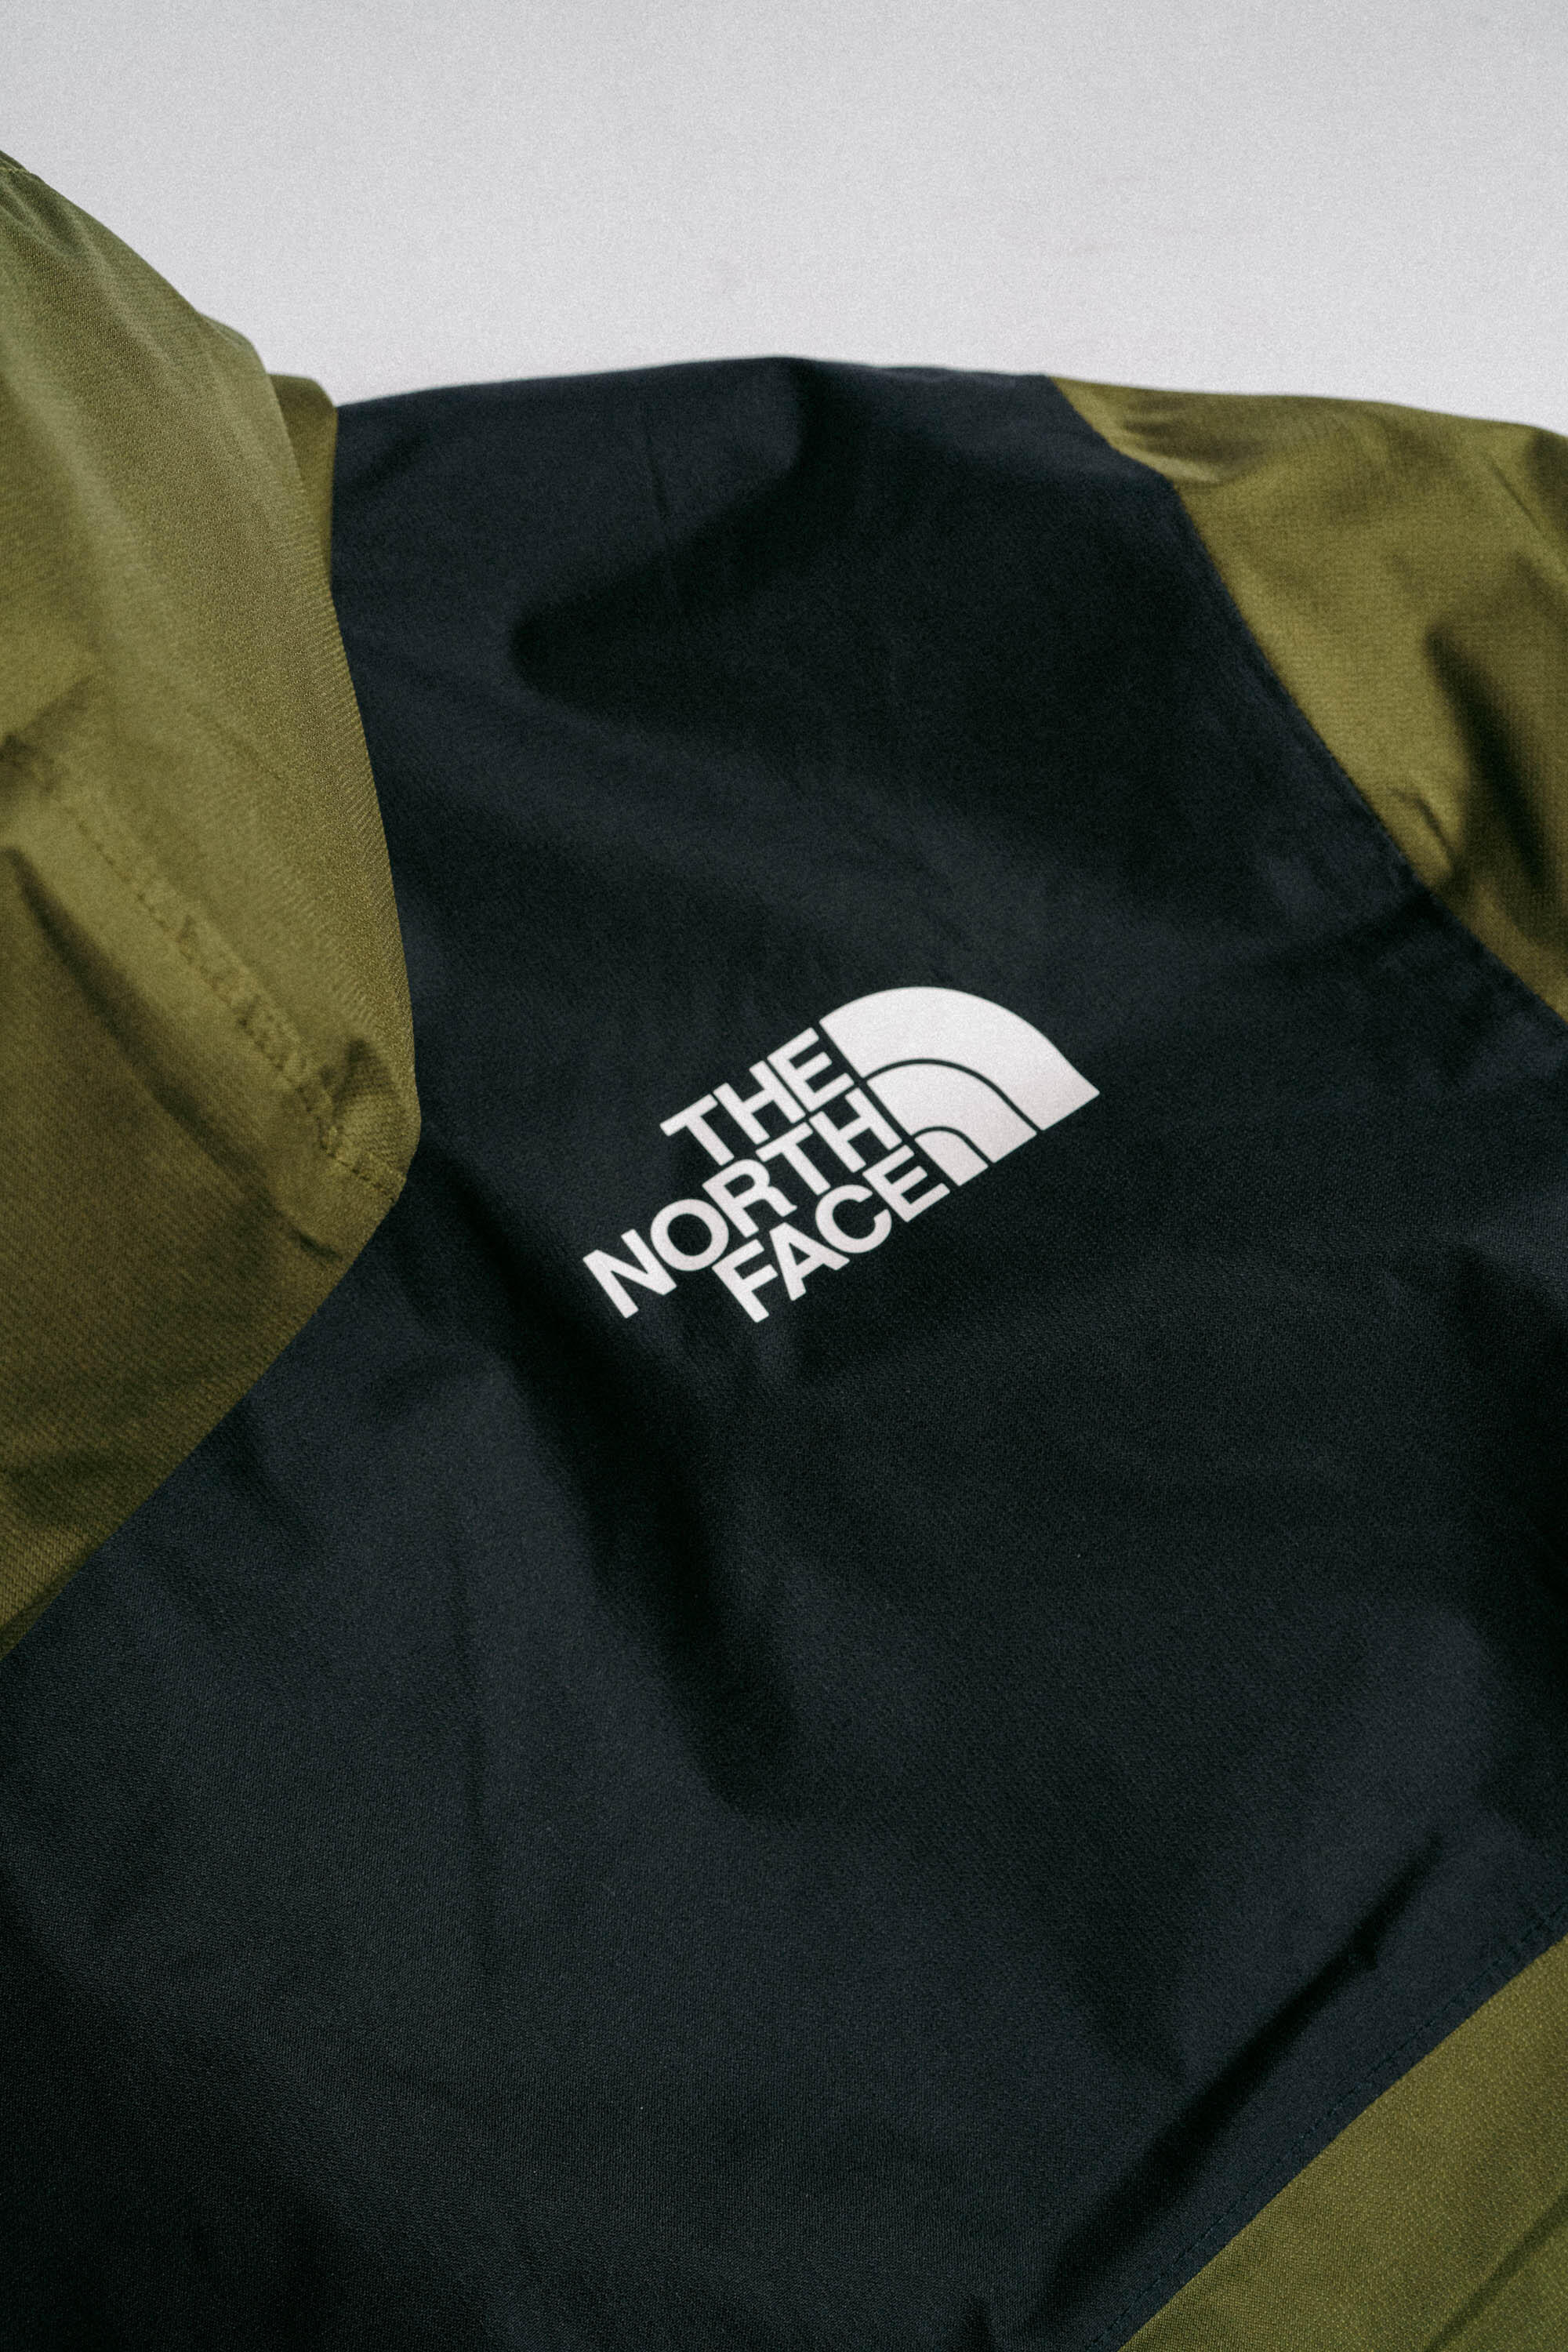 The North Face MOUNTAIN Q JACKET